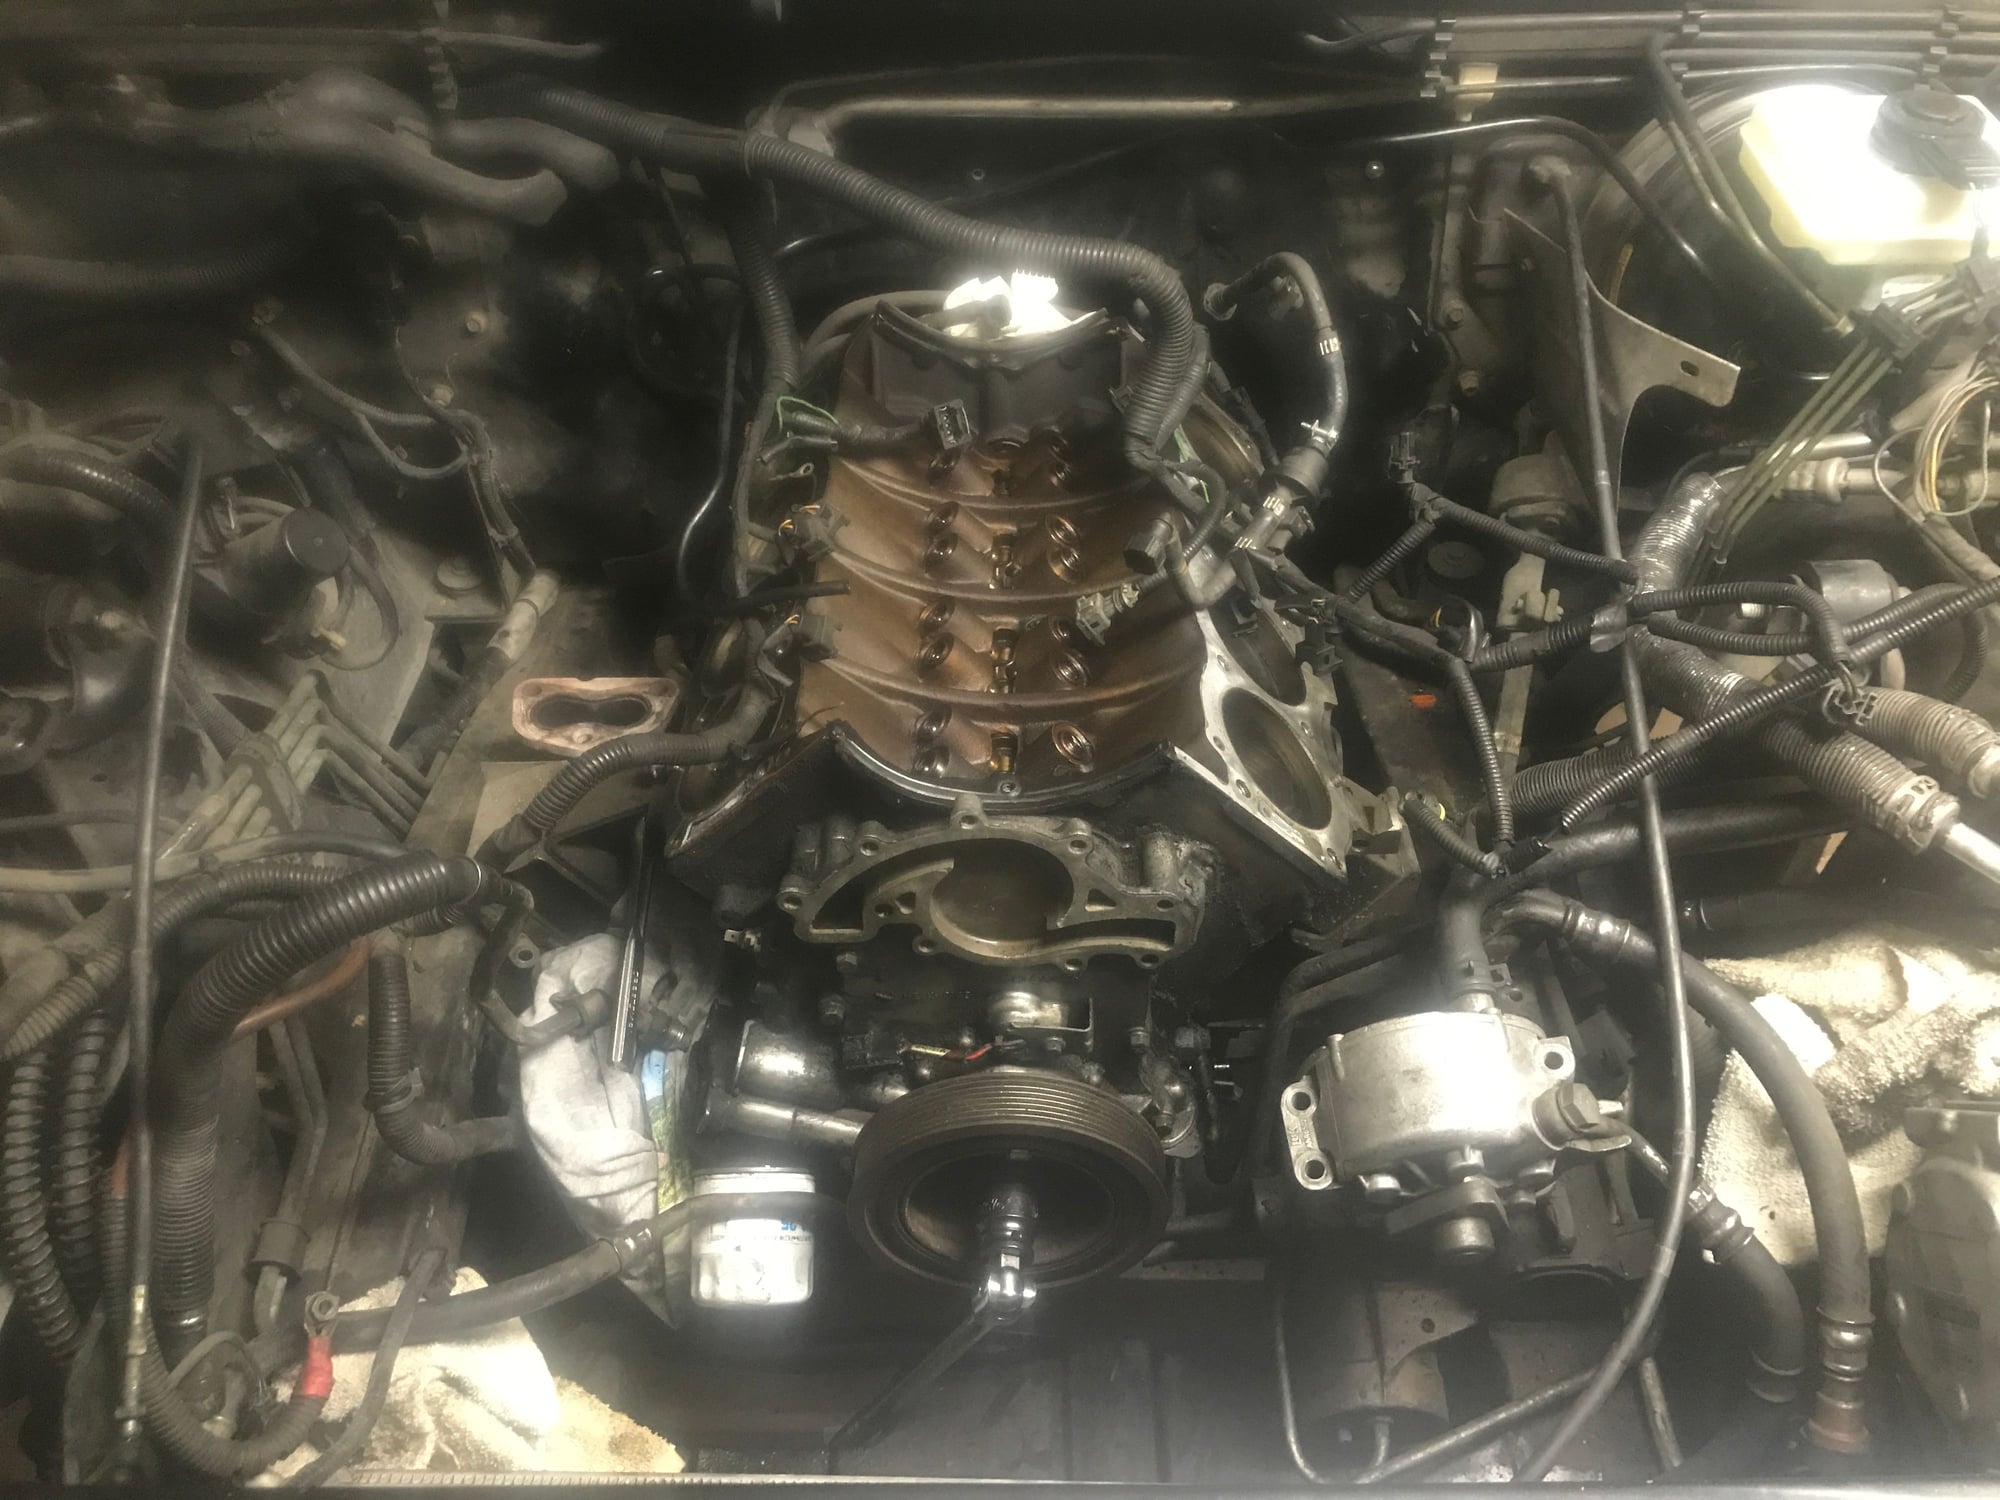 Engine Rebuild 4.6 components in a 4.0 Land Rover